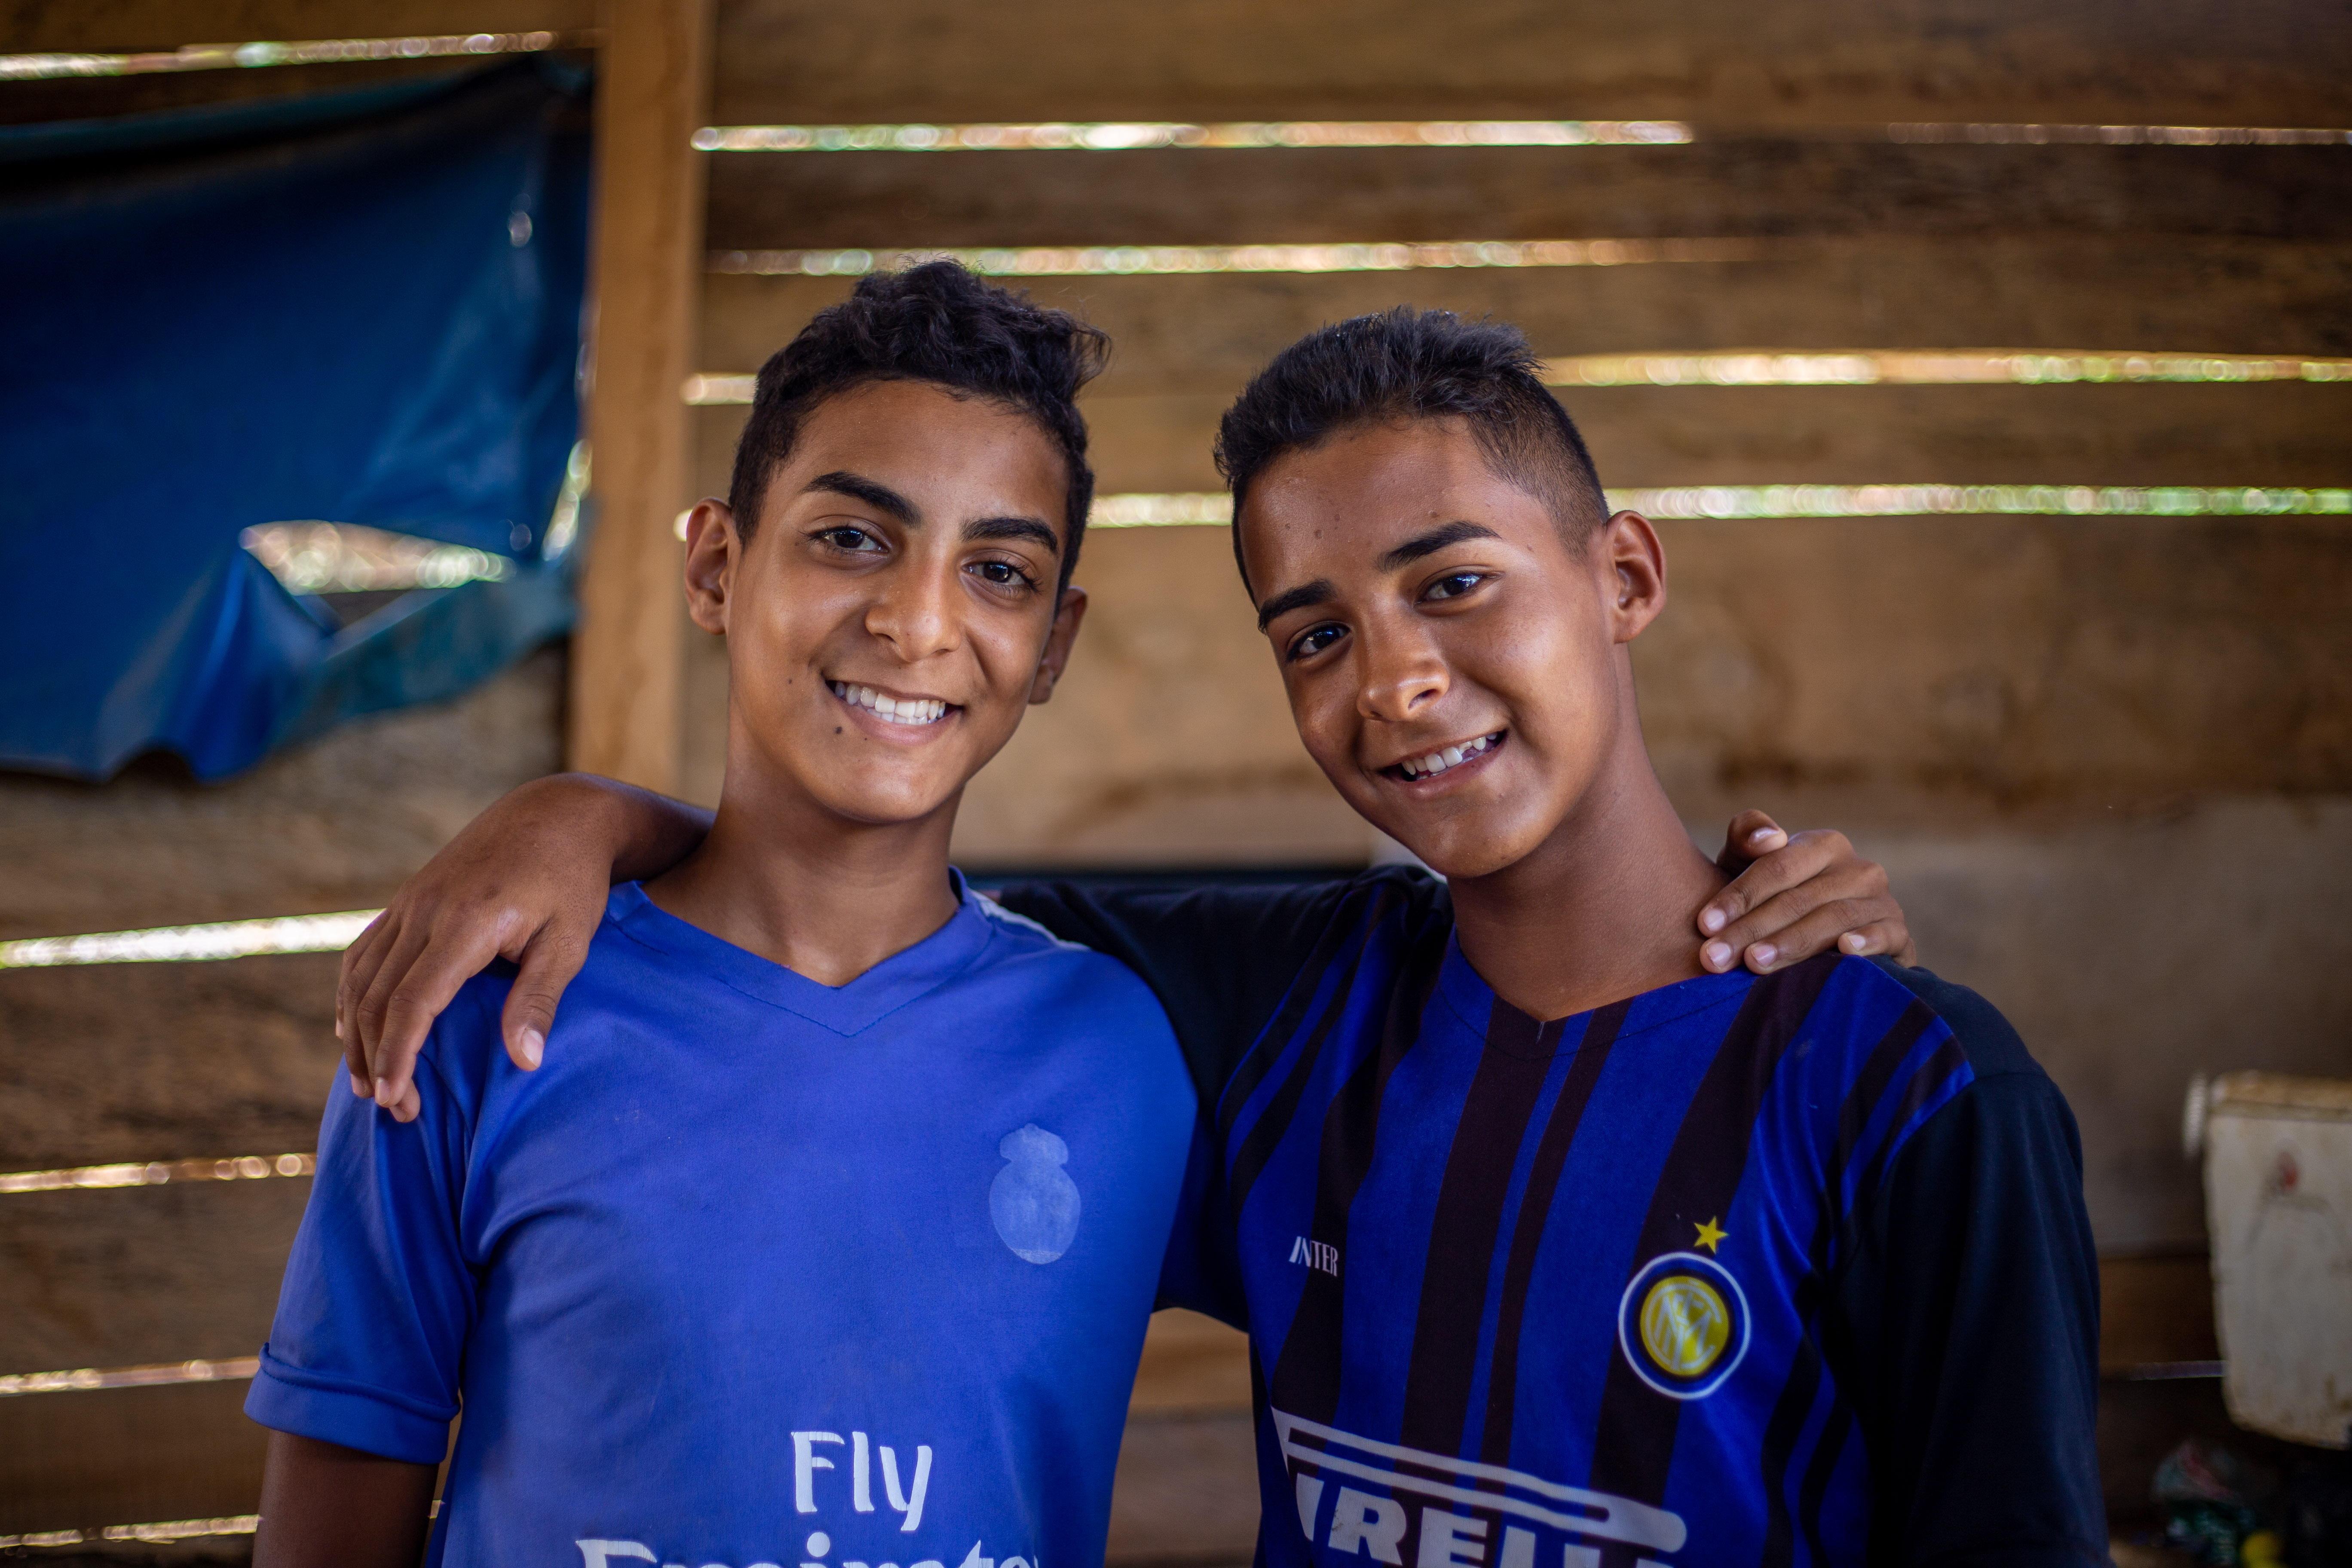 Two teen boys wearing blue and black shirts have their arms around each other, smiling at the camera. 